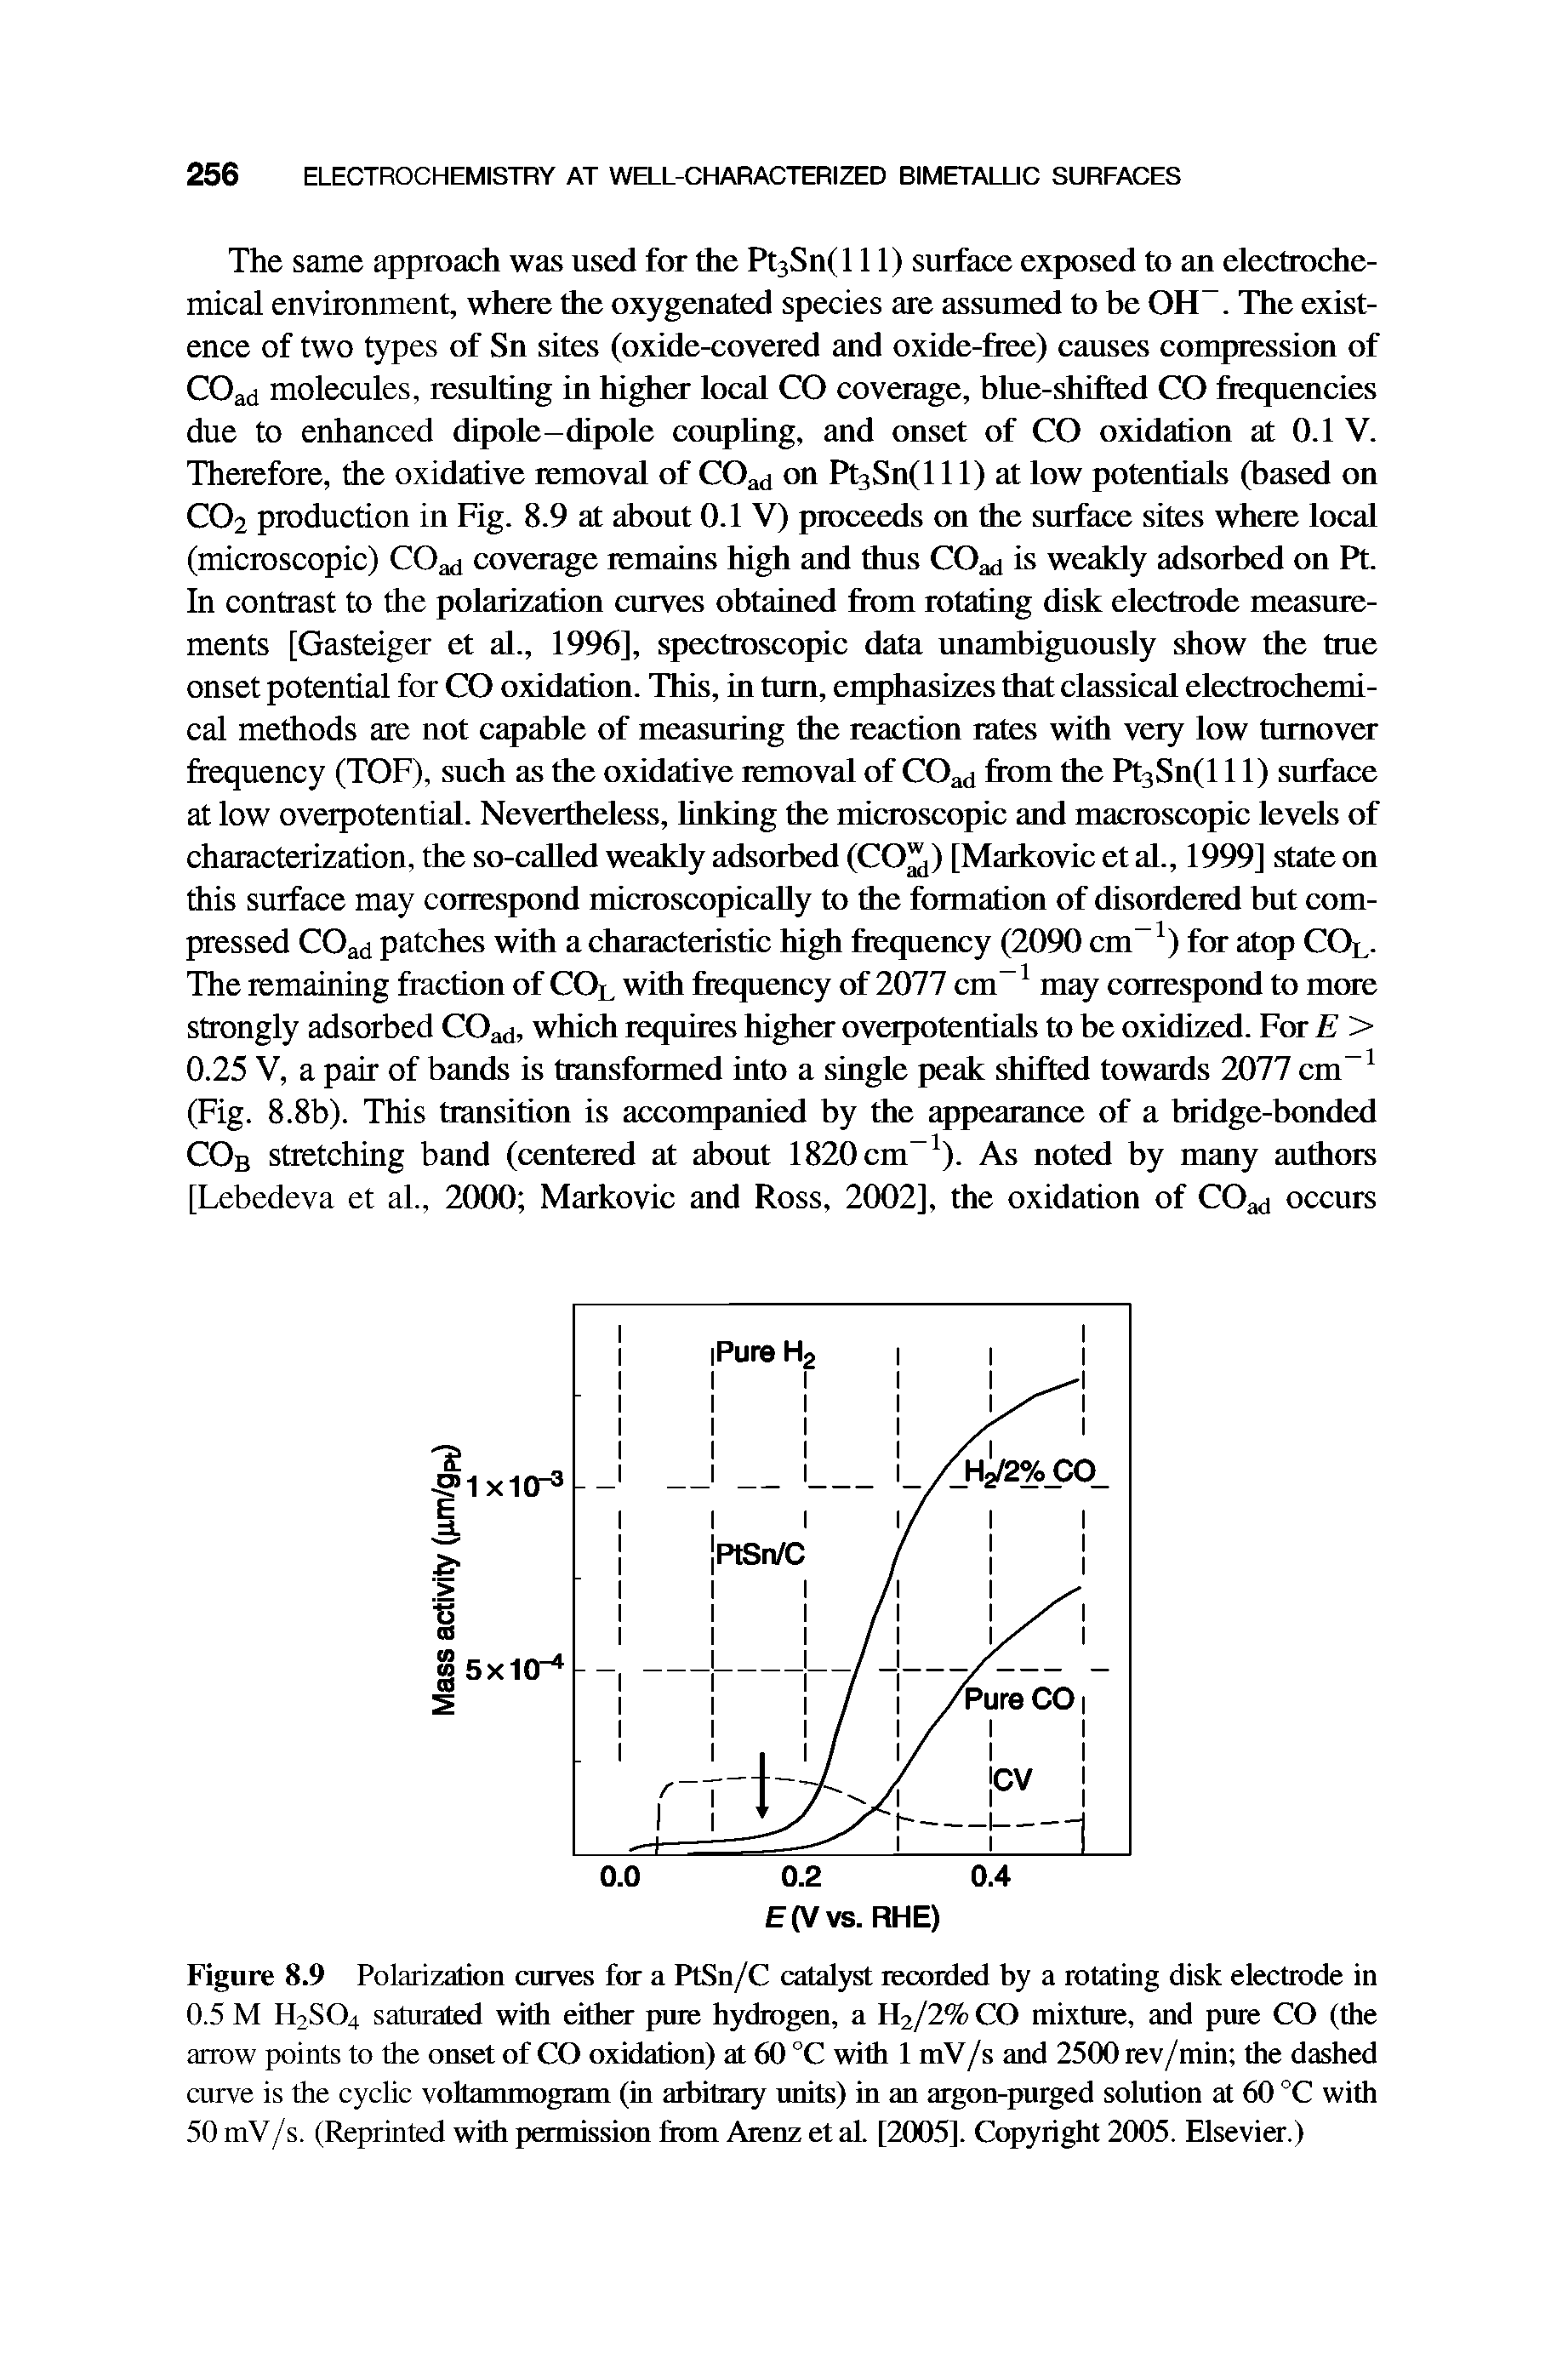 Figure 8.9 Polarization curves for a PtSn/C catalyst recorded by a rotating disk electrode in 0.5 M H2SO4 saturated with either pure hydrogen, a H2/2% CO mixture, and pure CO (the arrow points to the onset of CO oxidation) at 60 °C with 1 mV/s and 2500 rev/min the dashed curve is the cyclic voltammogram (in arbitrary units) in an argon-purged solution at 60 °C with 50 mV/s. (Reprinted with permission from Aienz etal. [2005]. Copyright 2005. Elsevier.)...